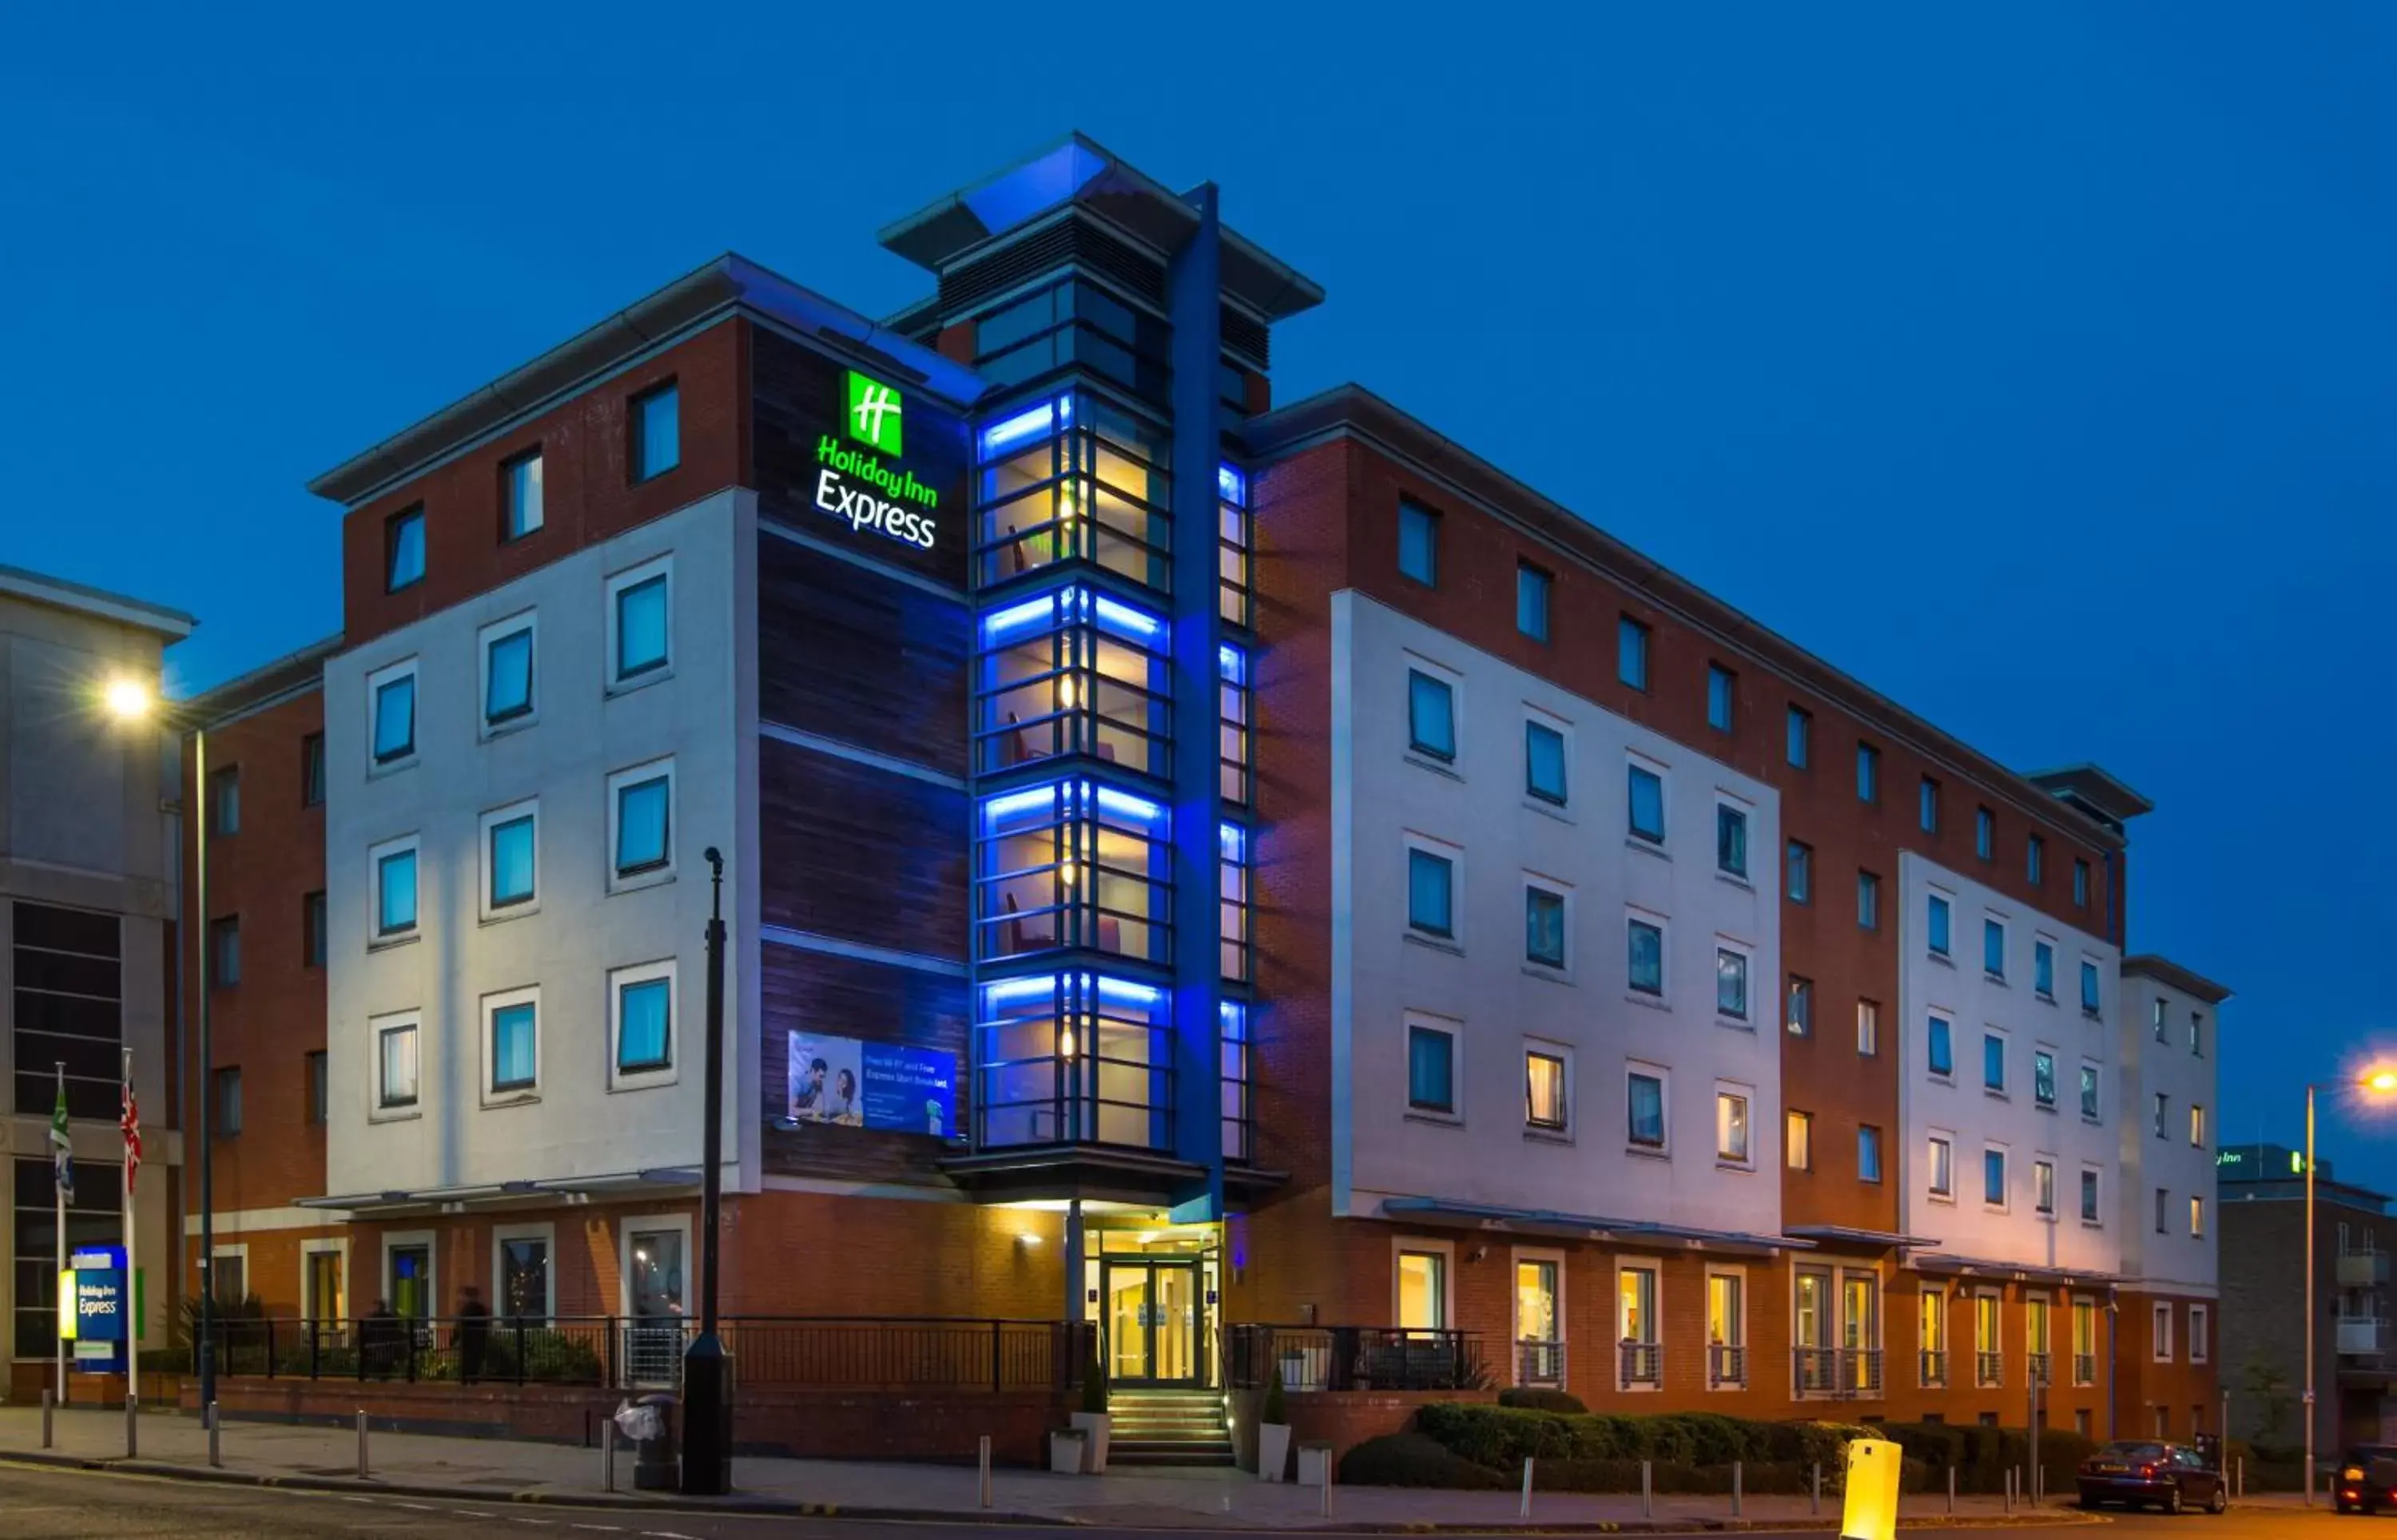 Property building in Holiday Inn Express Stevenage, an IHG Hotel